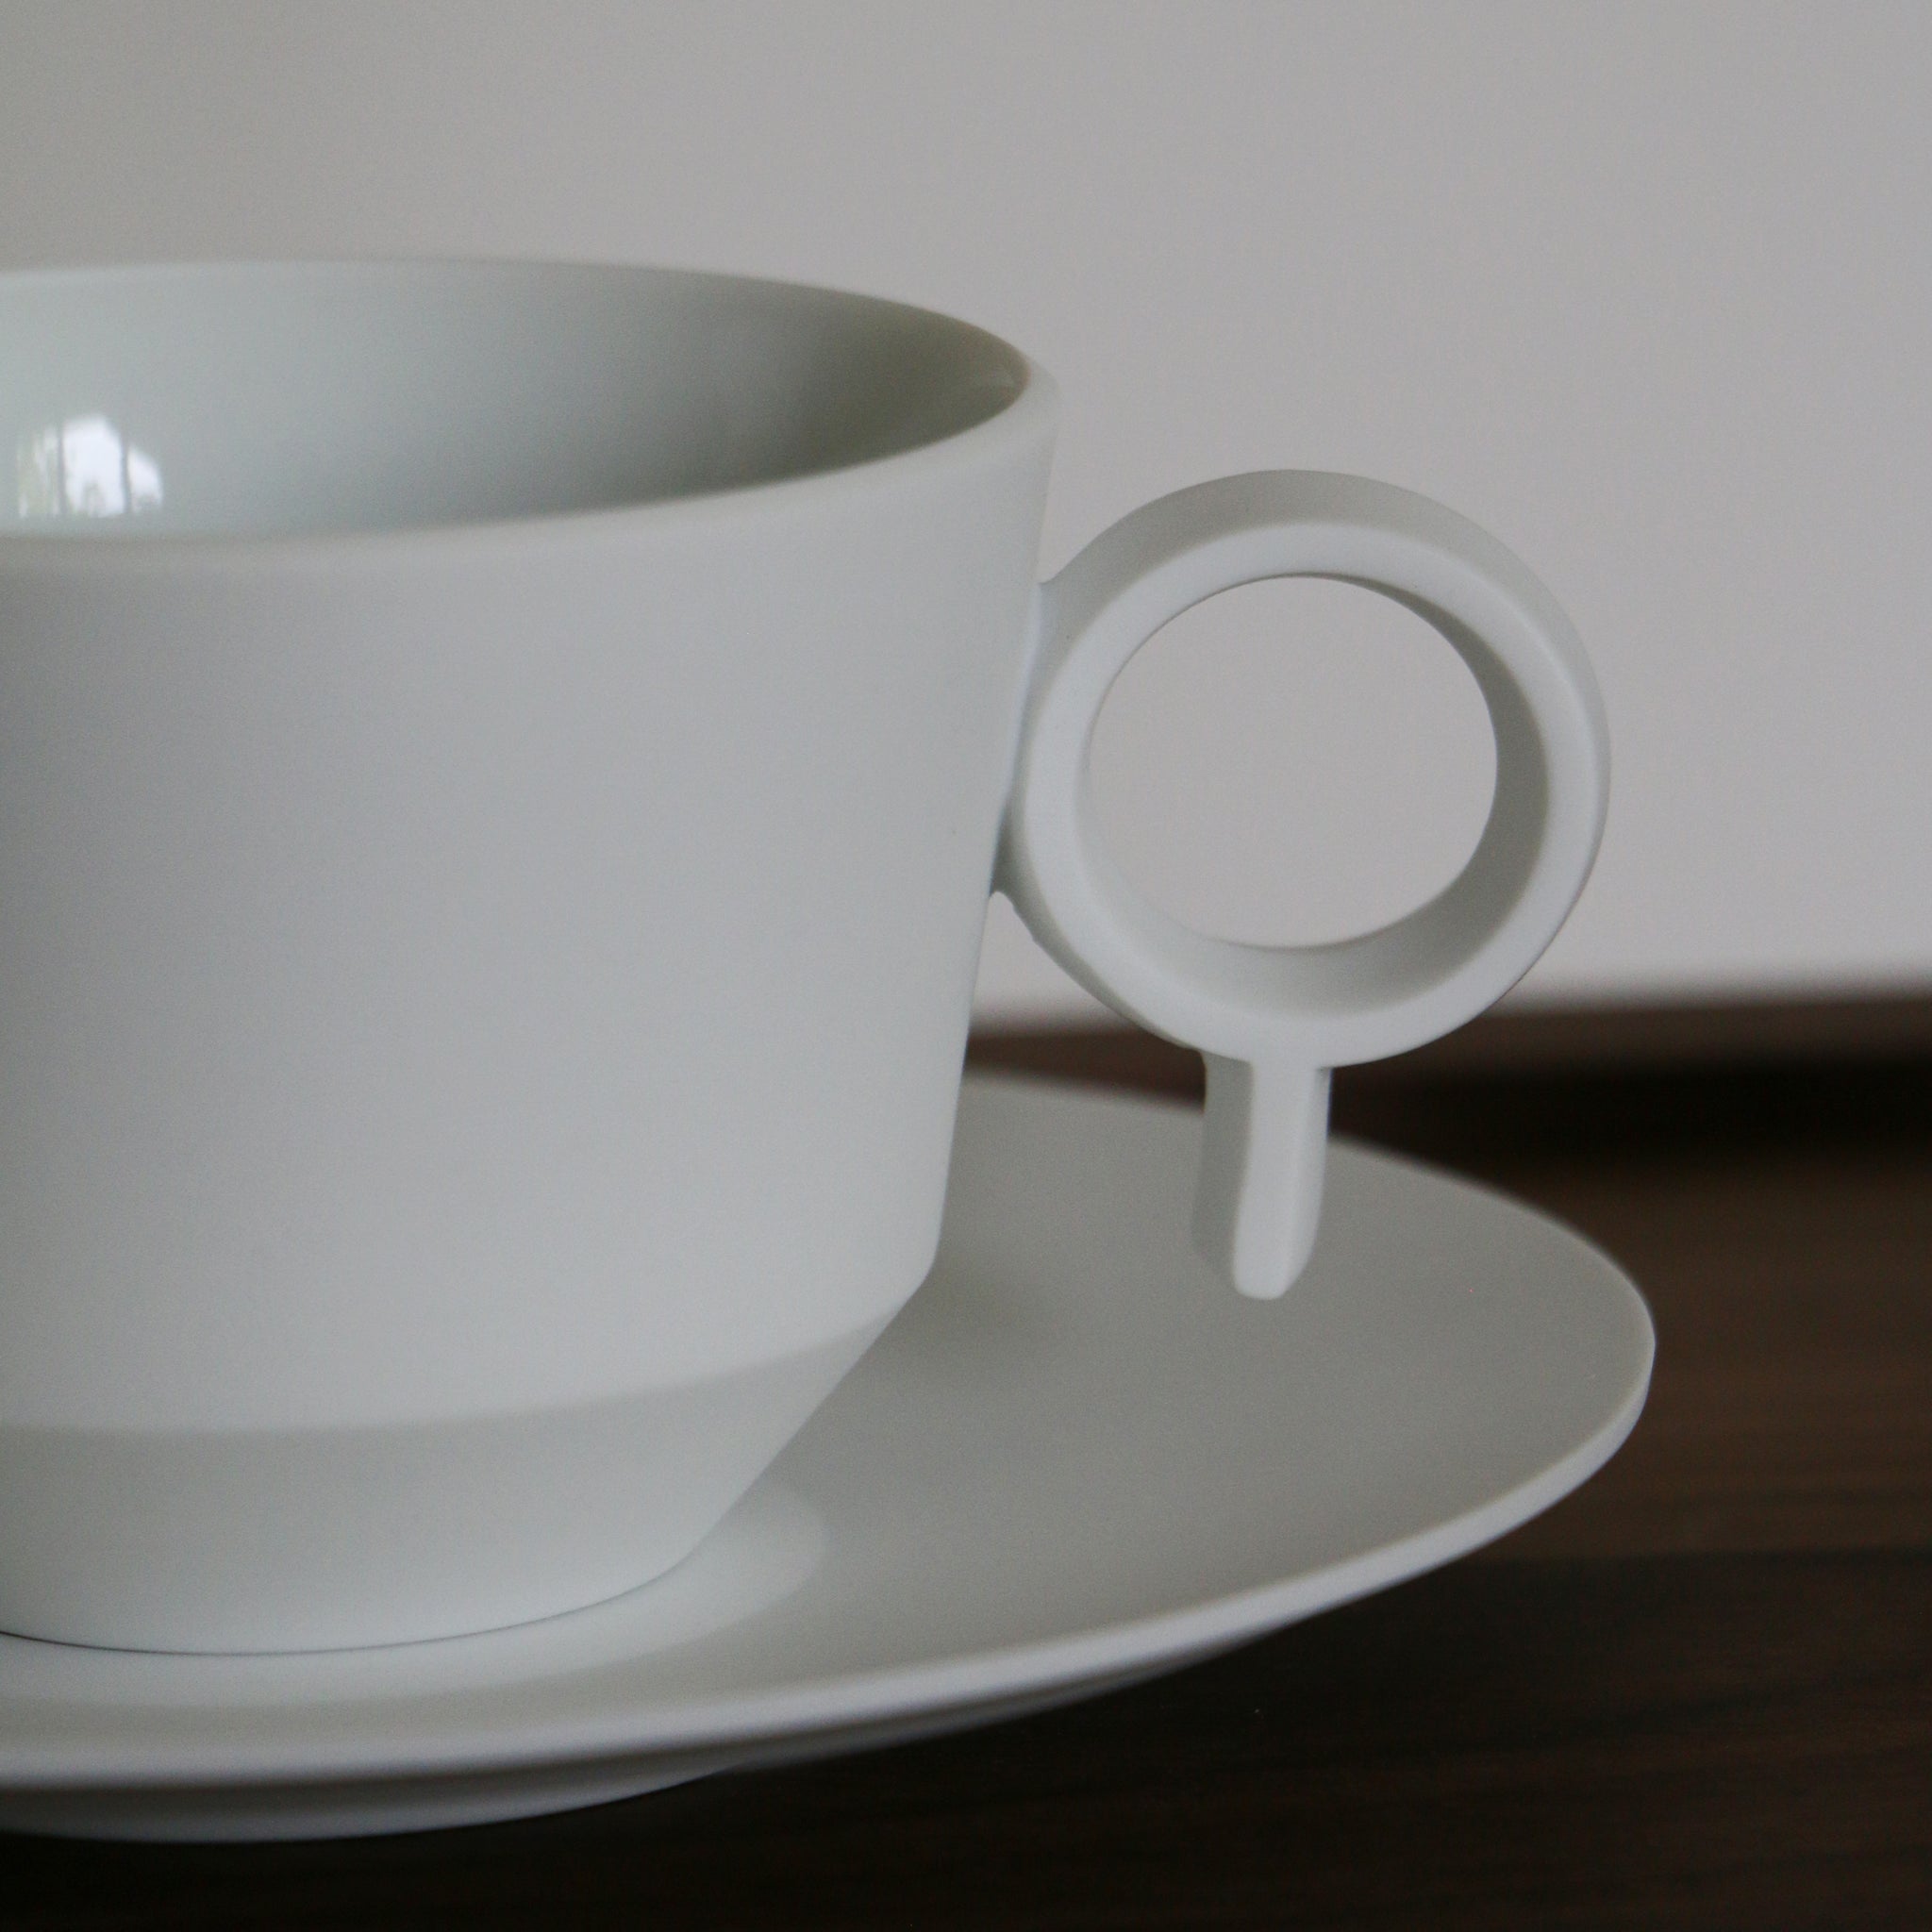 Earlobe Cup and Saucer